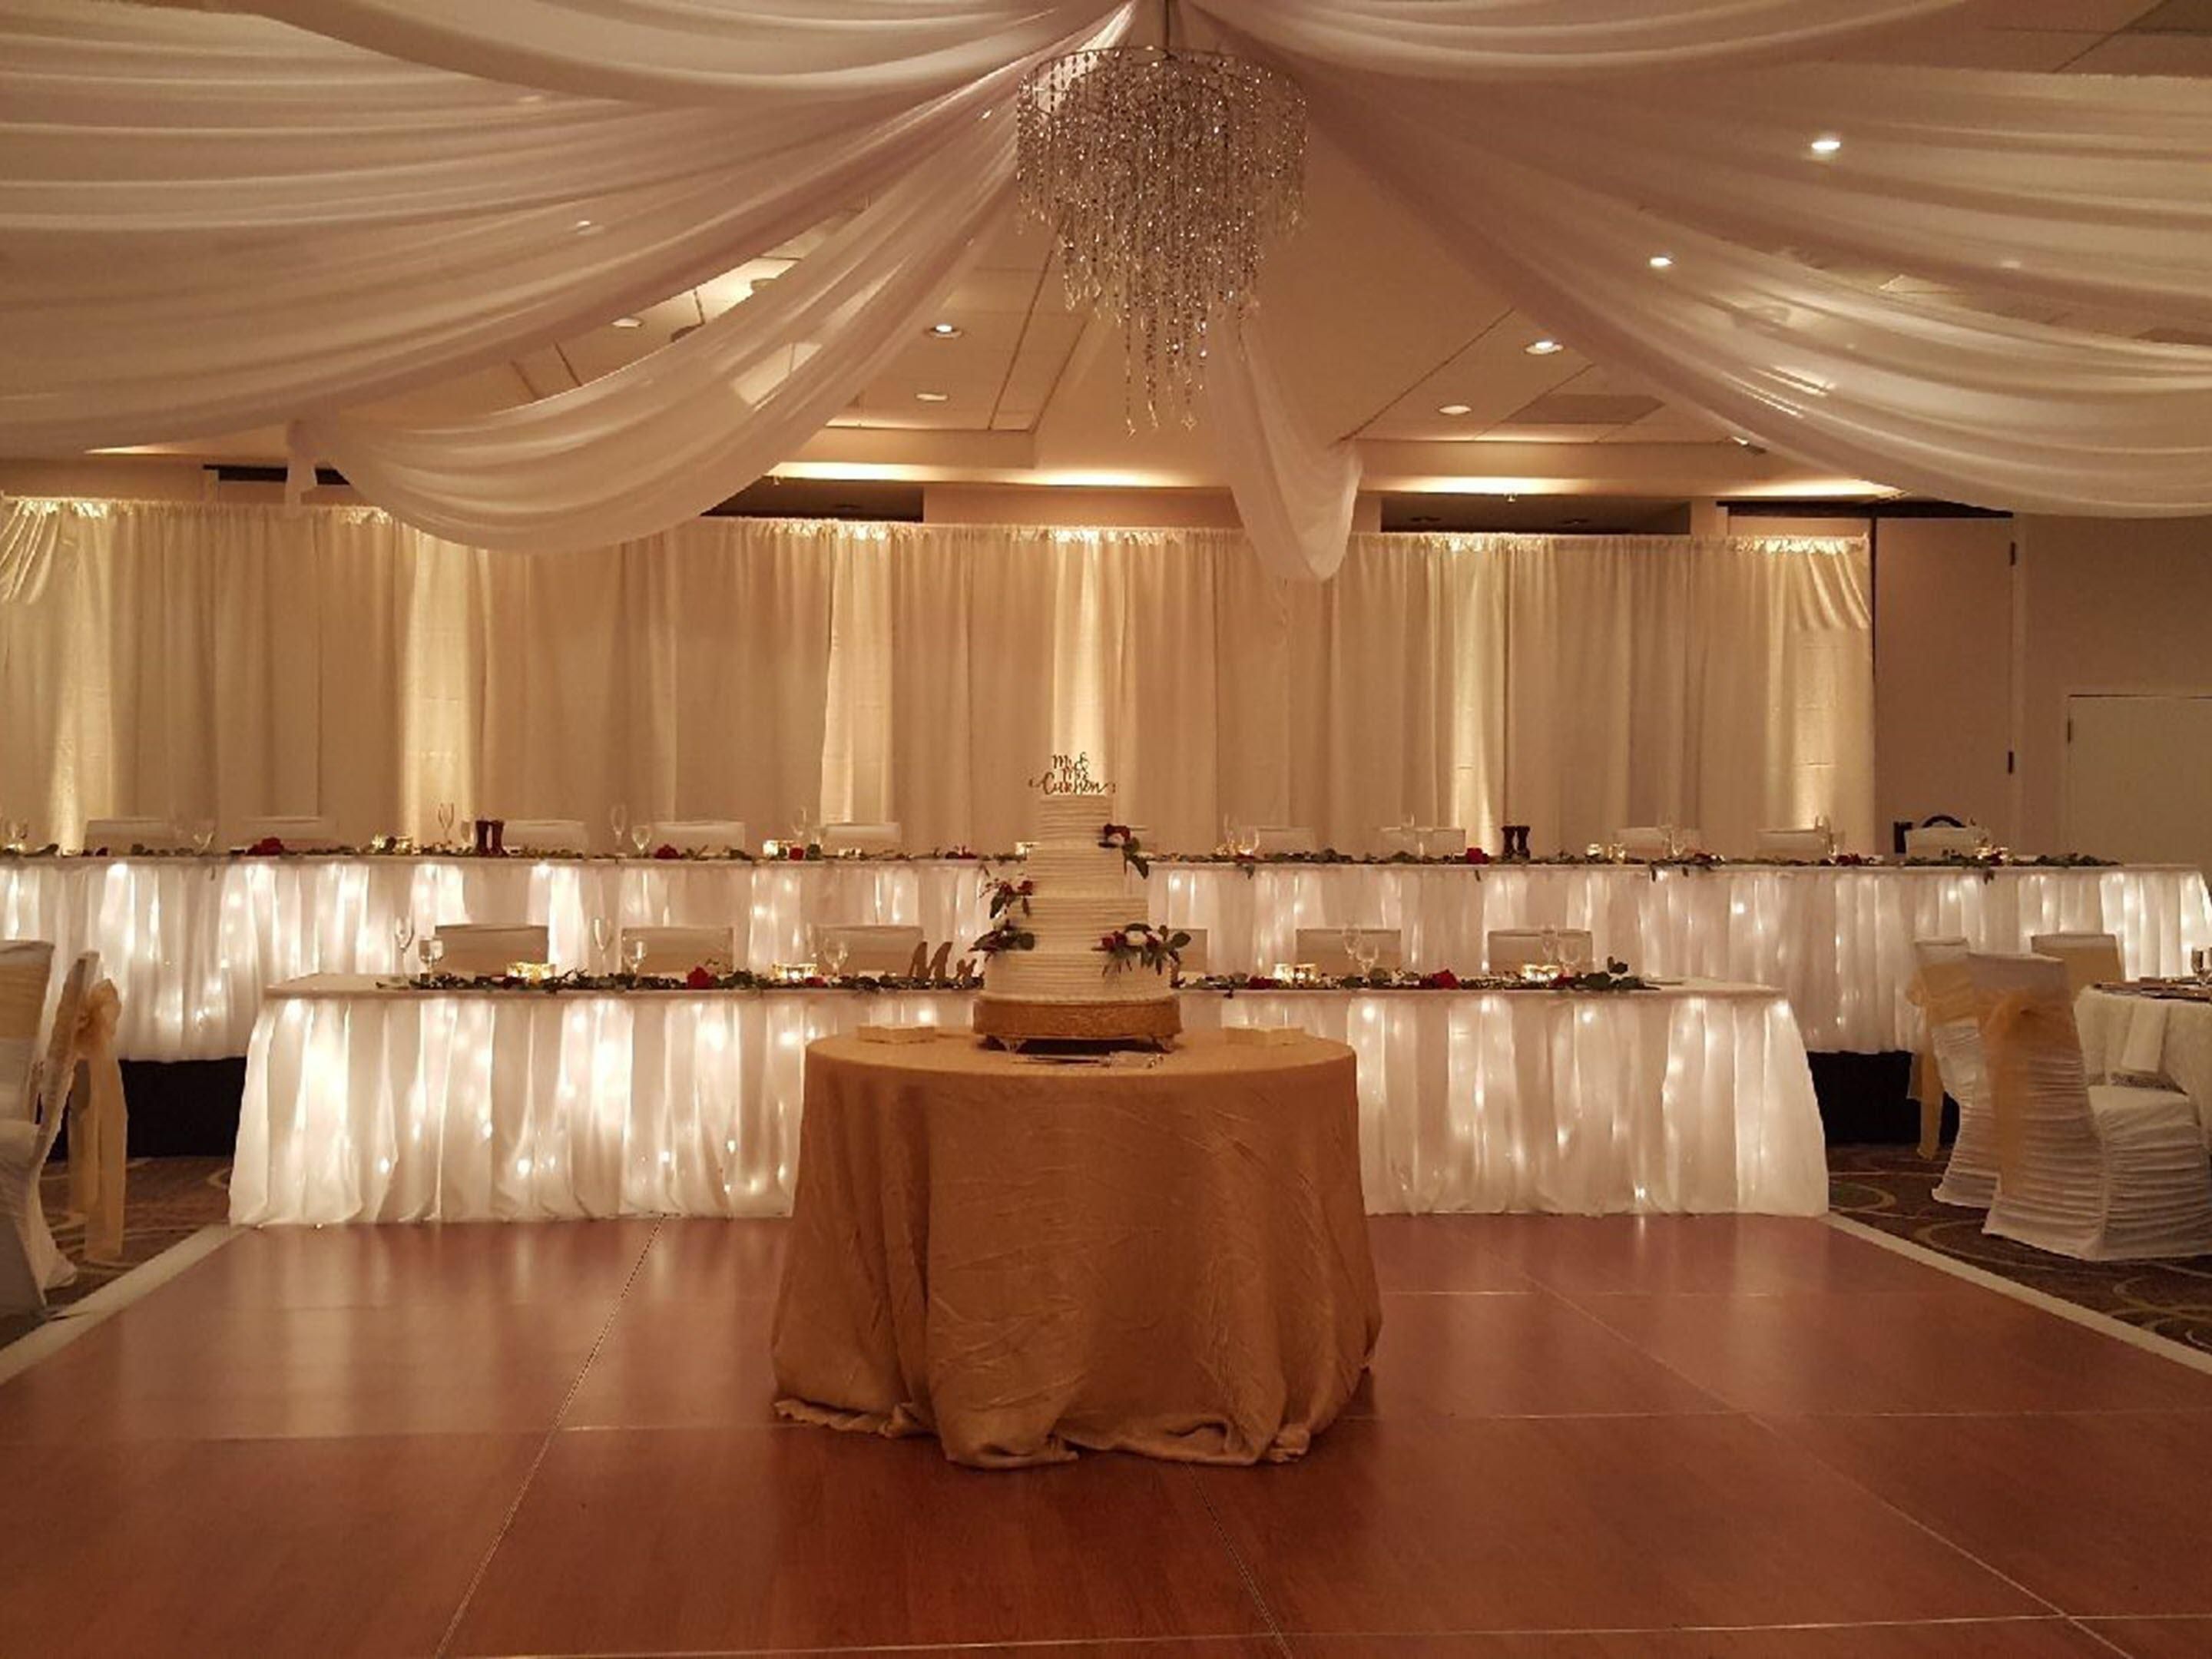 We understand how important your special day is and we look forward to helping you make a memory that lasts a lifetime together! You can select from several Wedding Reception packages to meet your unique needs and style. Our spacious ballroom will accommodate up to 250 wedding guests. Contact the hotel sales team directly to start planning!

